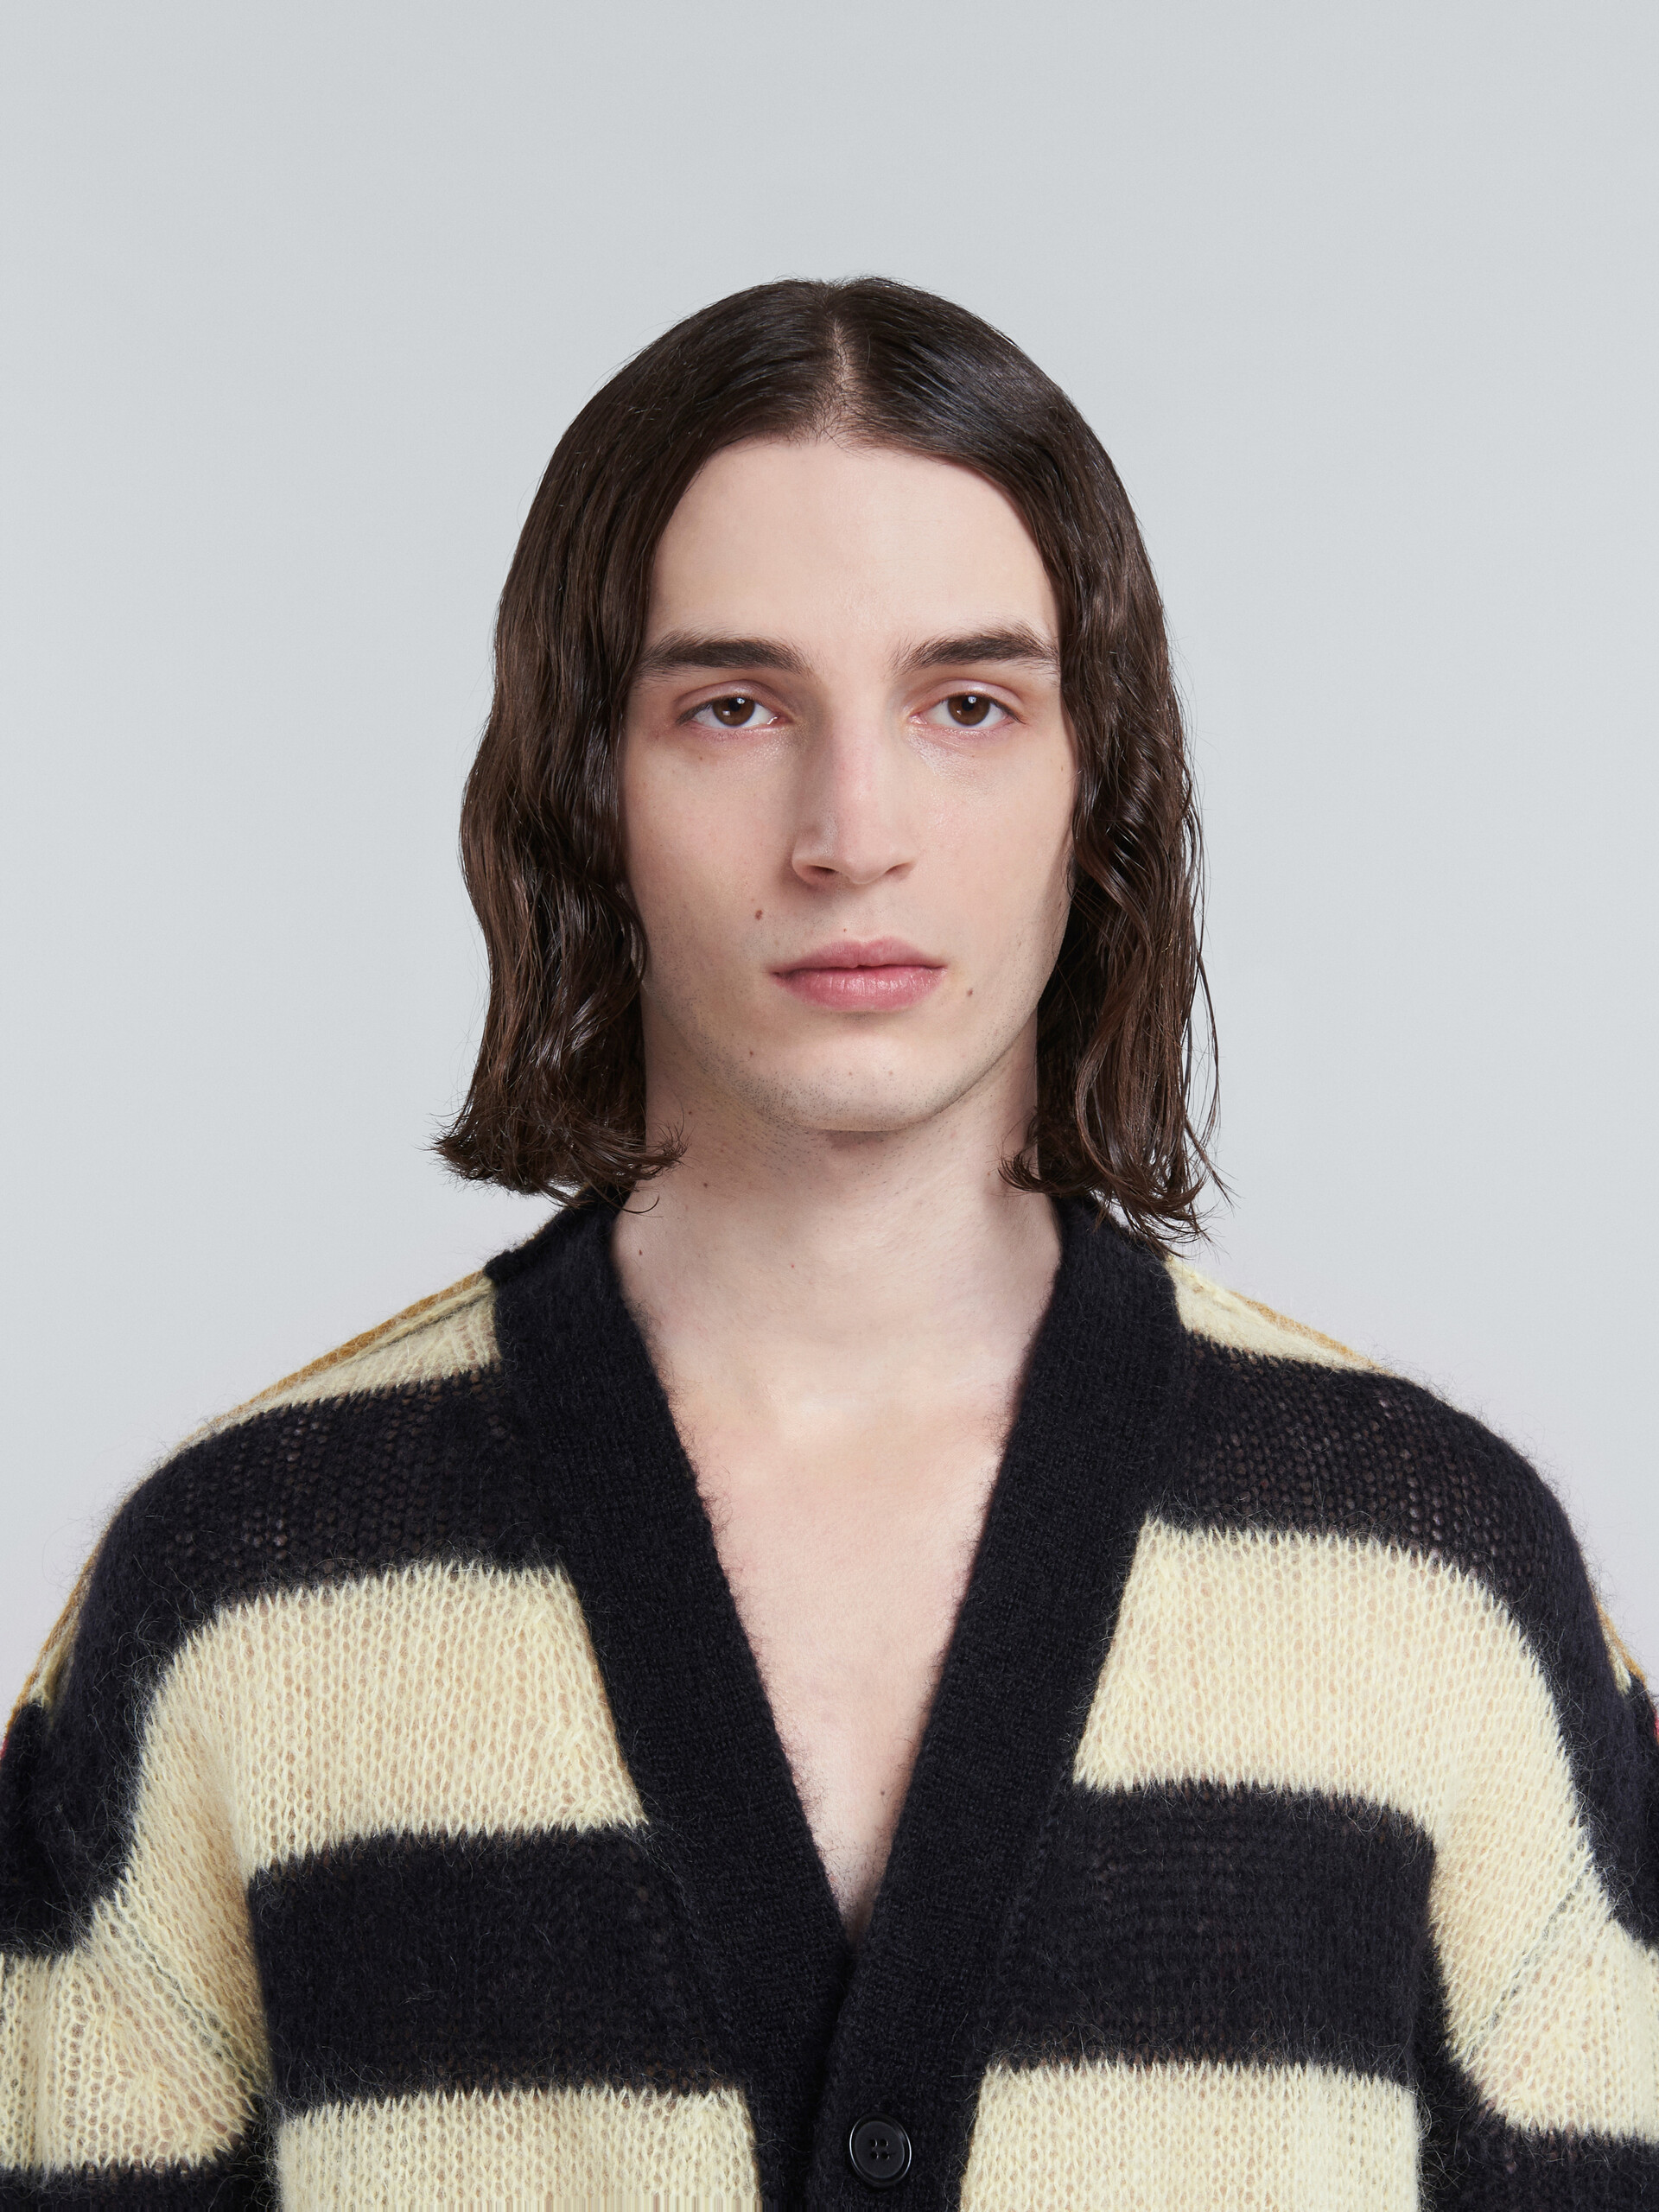 Mohair and wool cardigan with multicolour stripes - Pullovers - Image 4